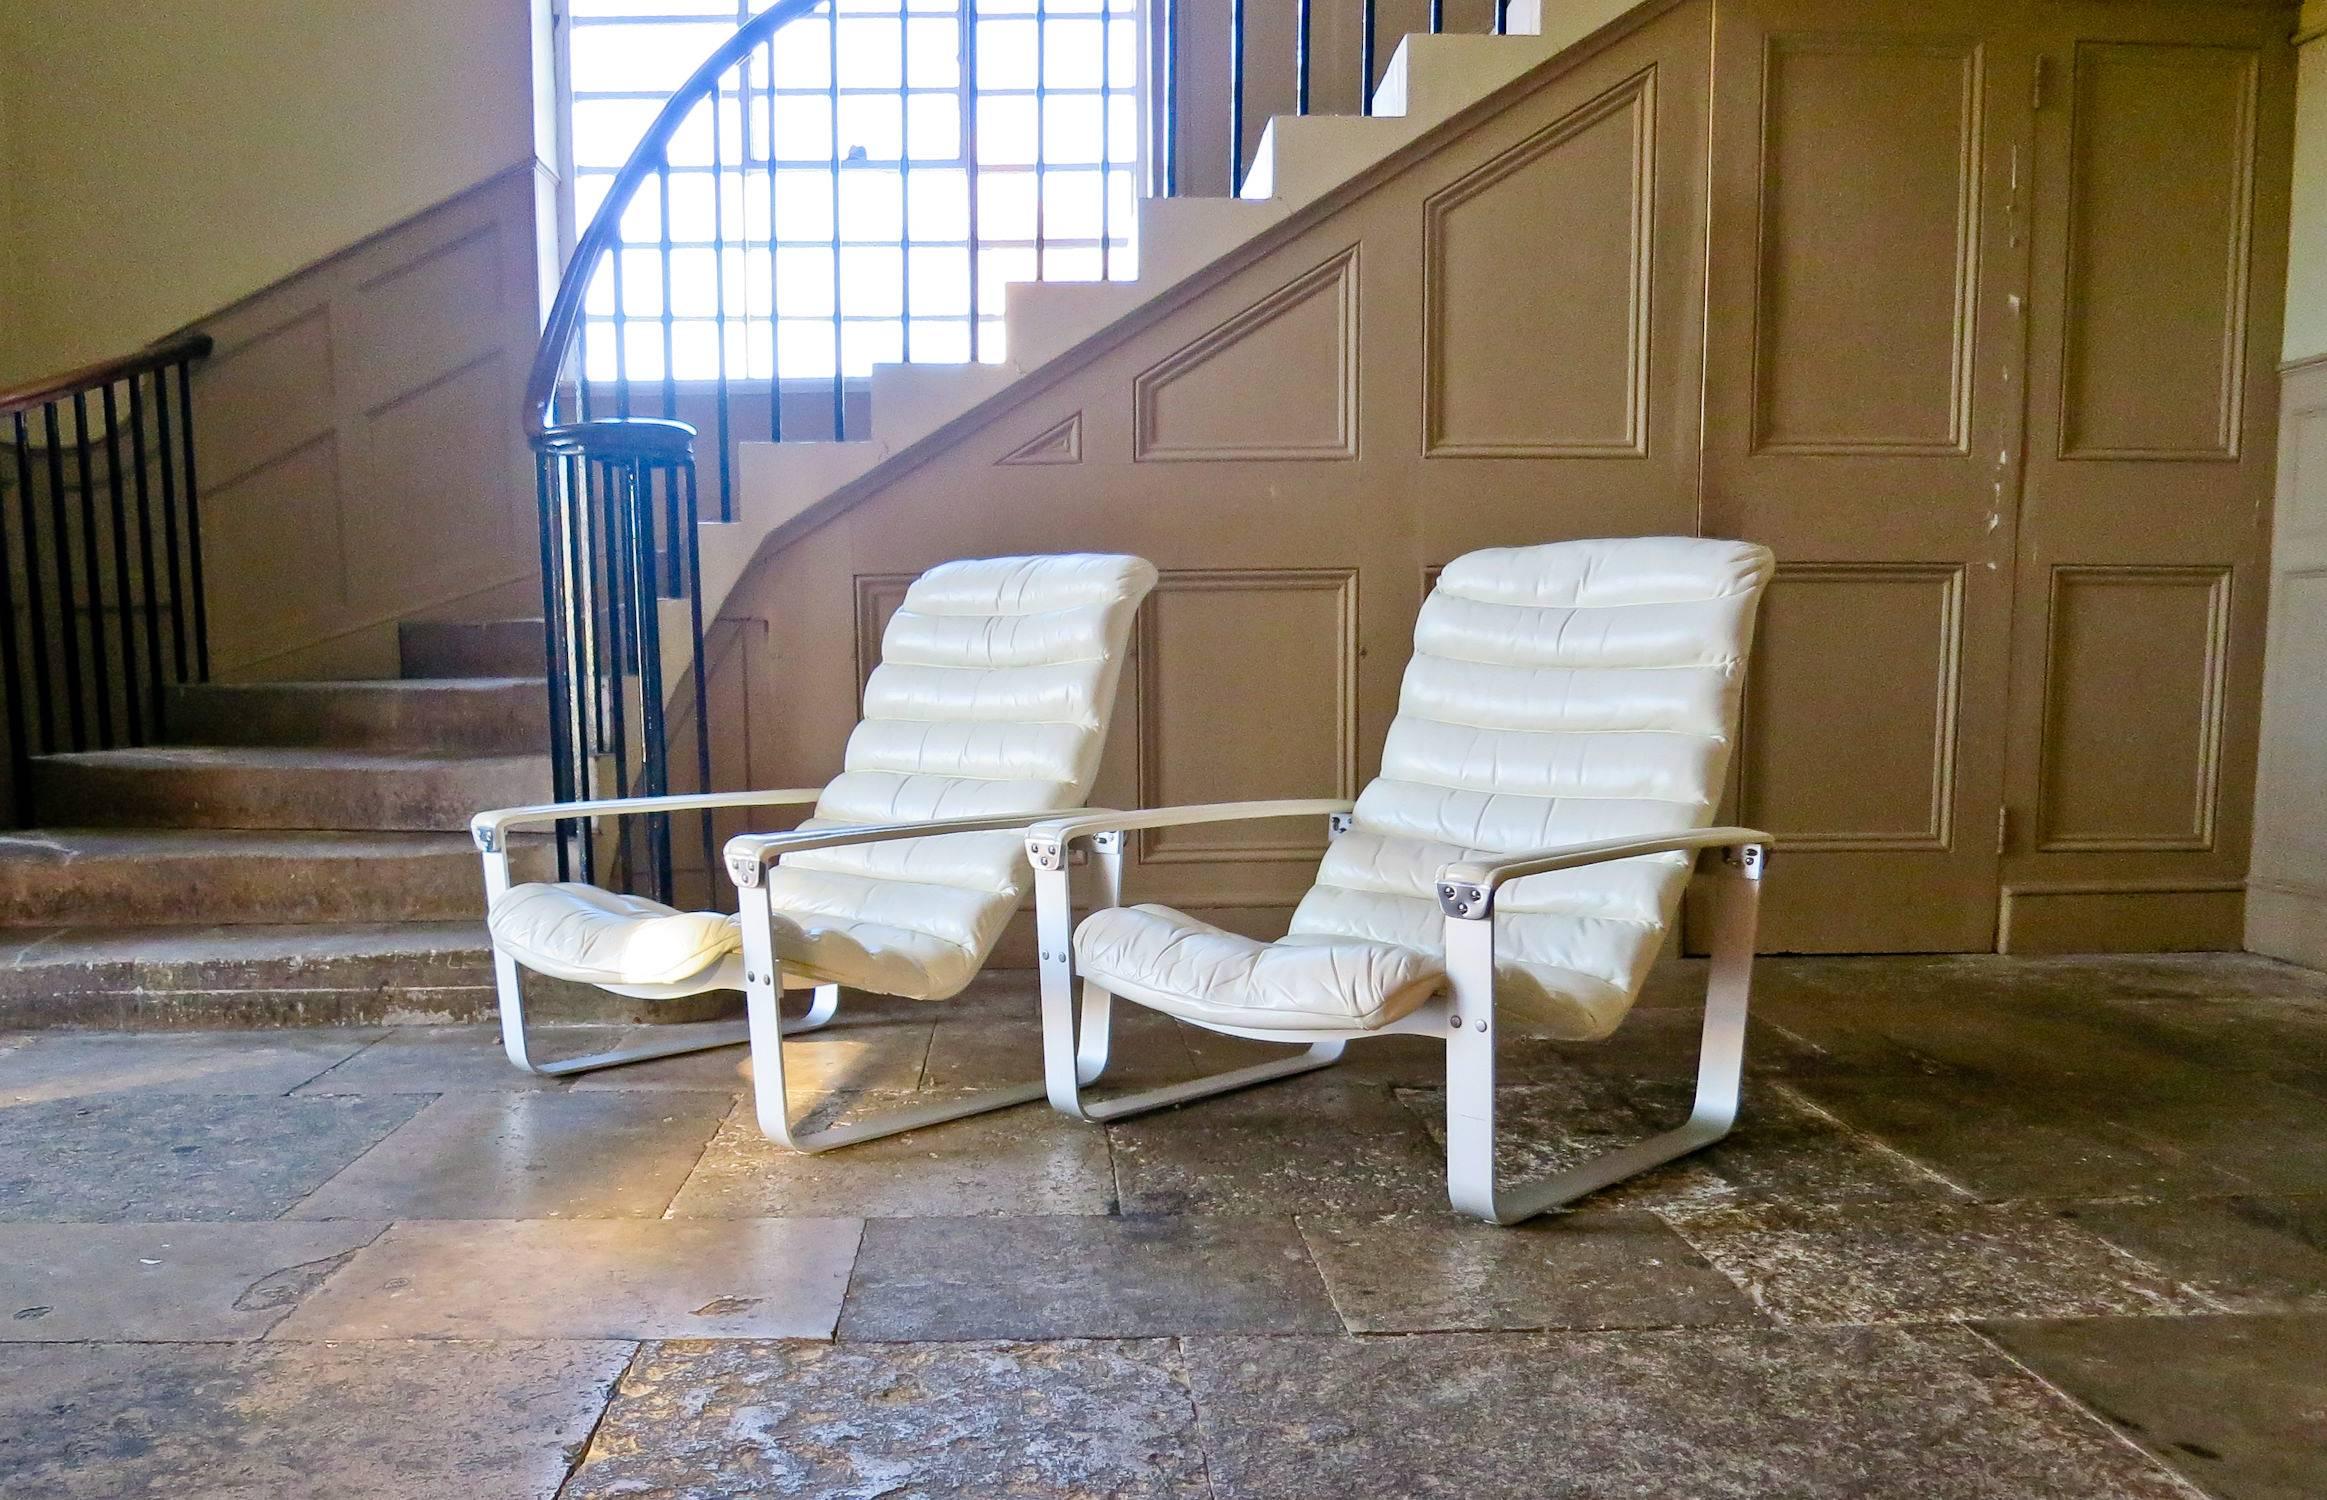 An impressive pair of Pulkka armchairs in cream leather from the 1960s. Padded shaped seat element in leather resting on an brushed aluminium frame with leather armrests held in place by chrome clasps, adjustable for three positions.

The